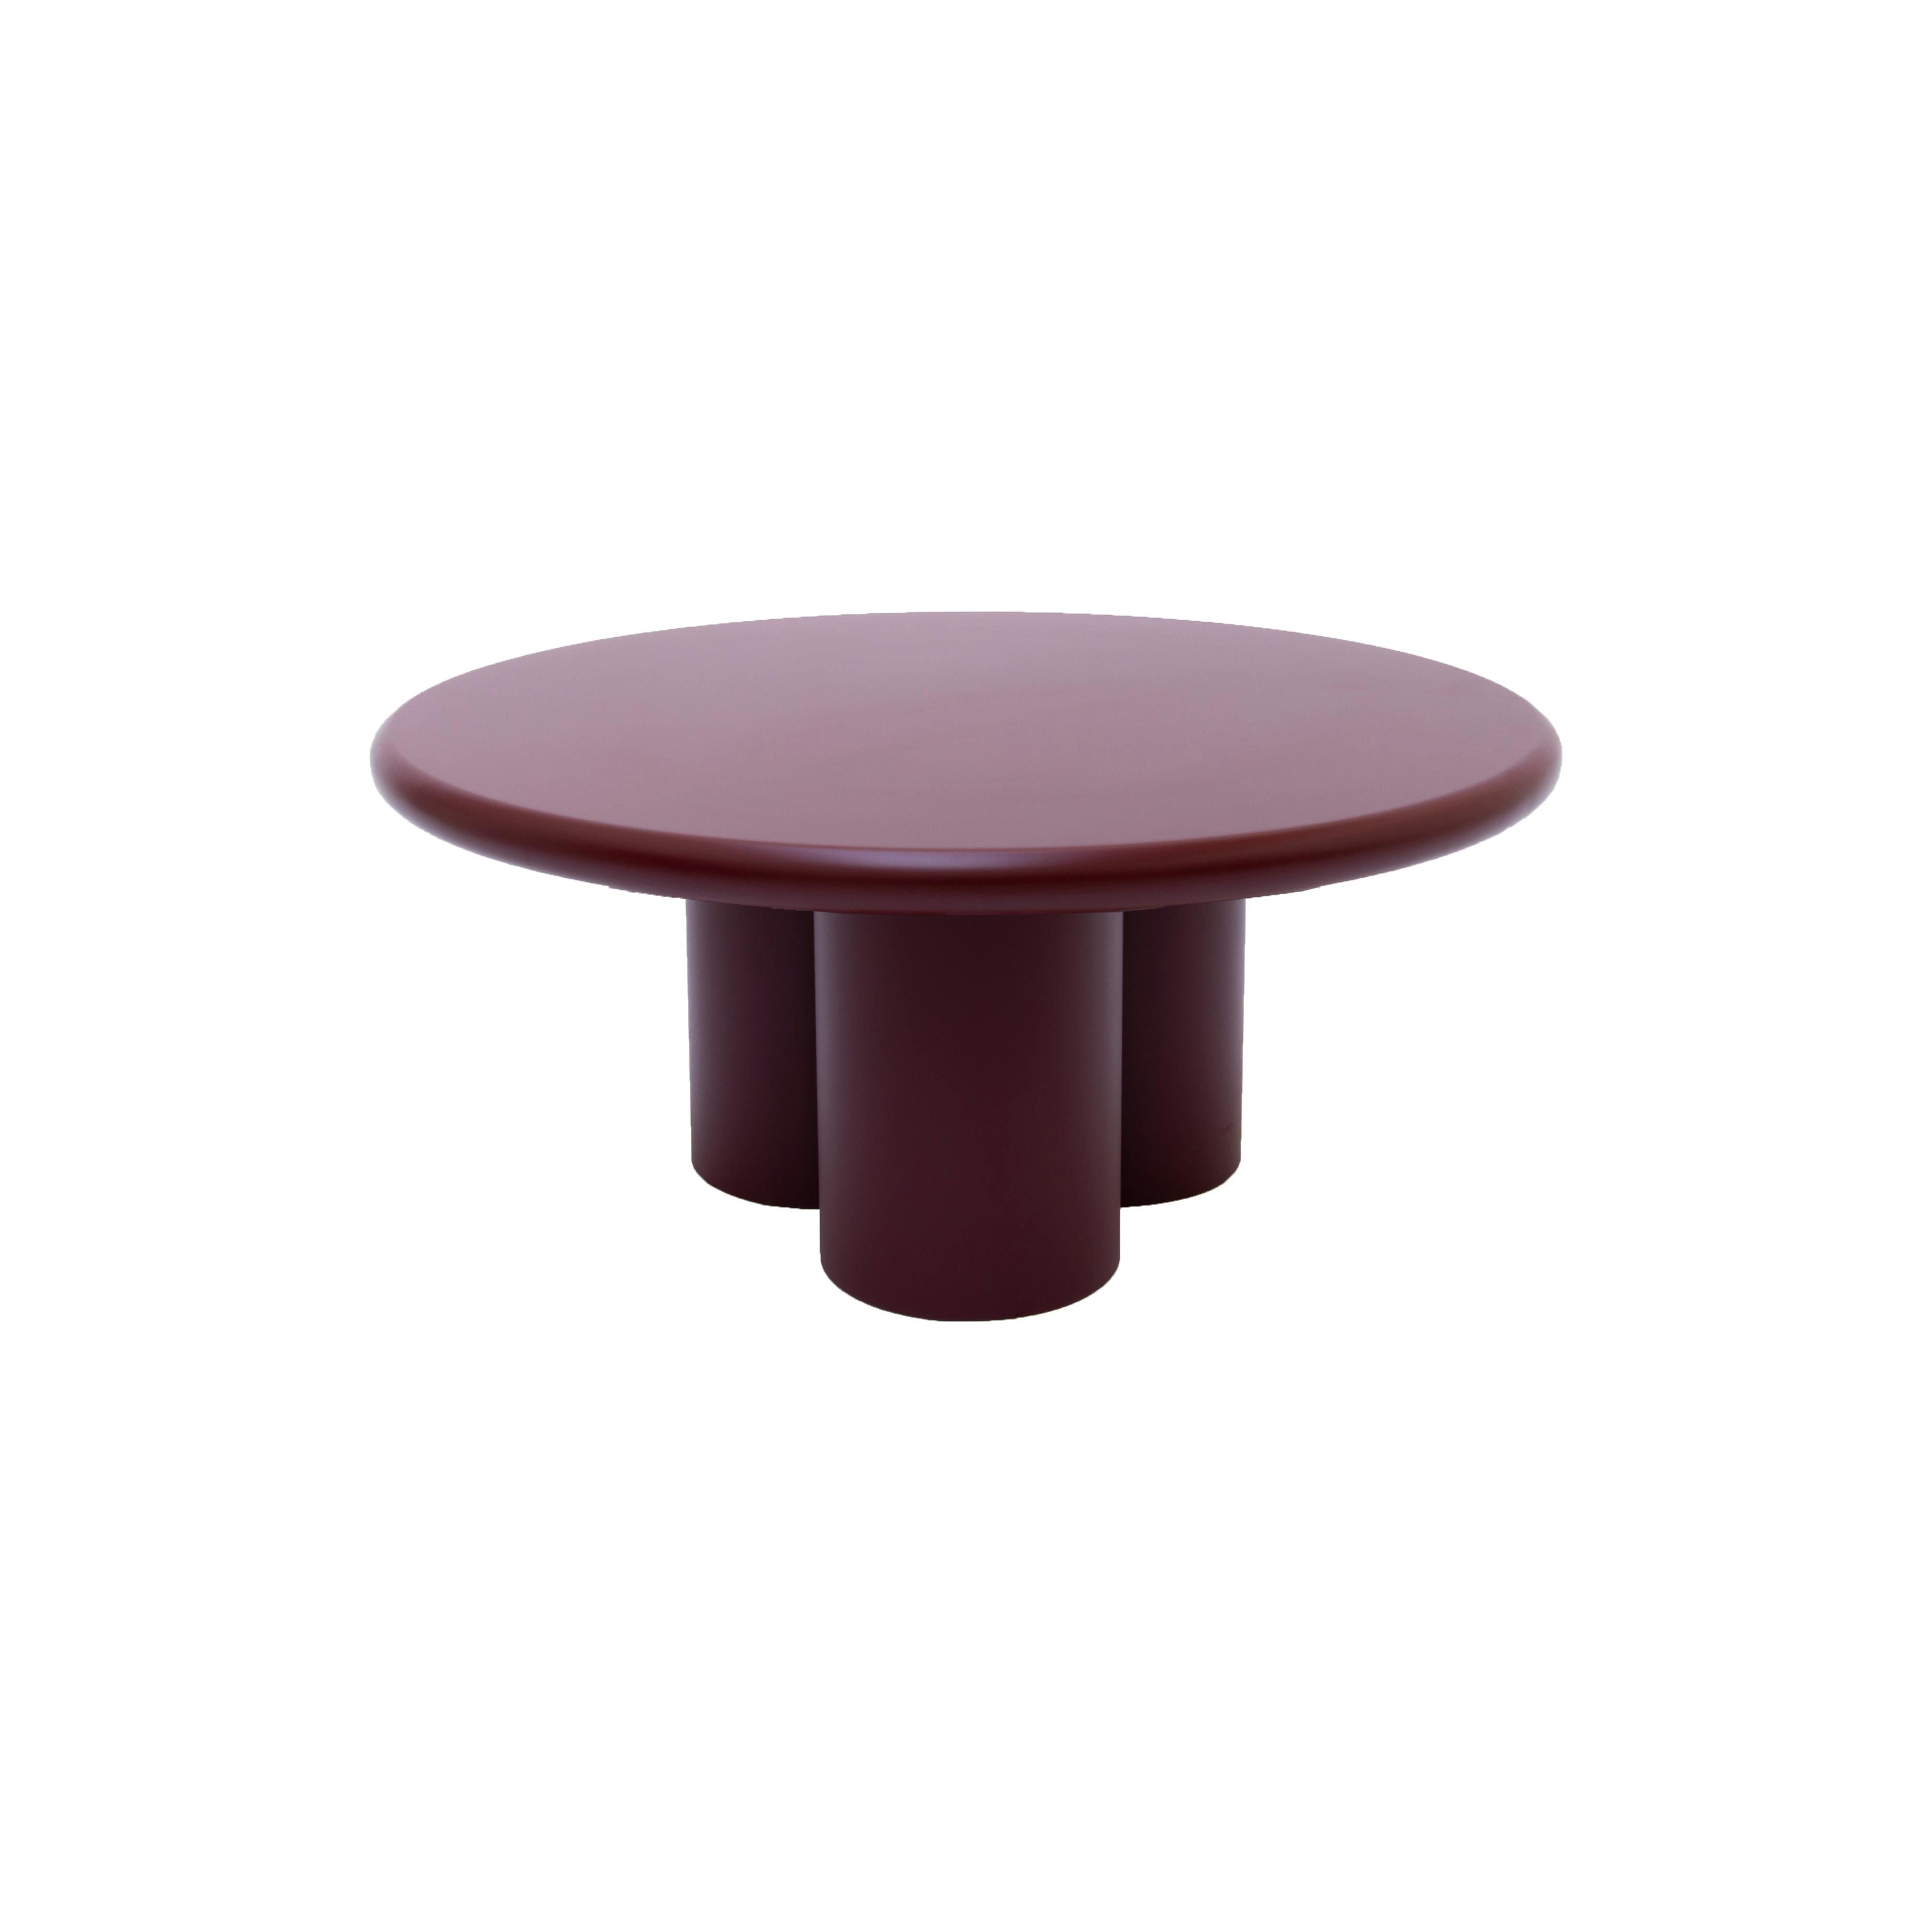 Polish Object 059 Mdf Red 80 Coffee Table by NG Design For Sale